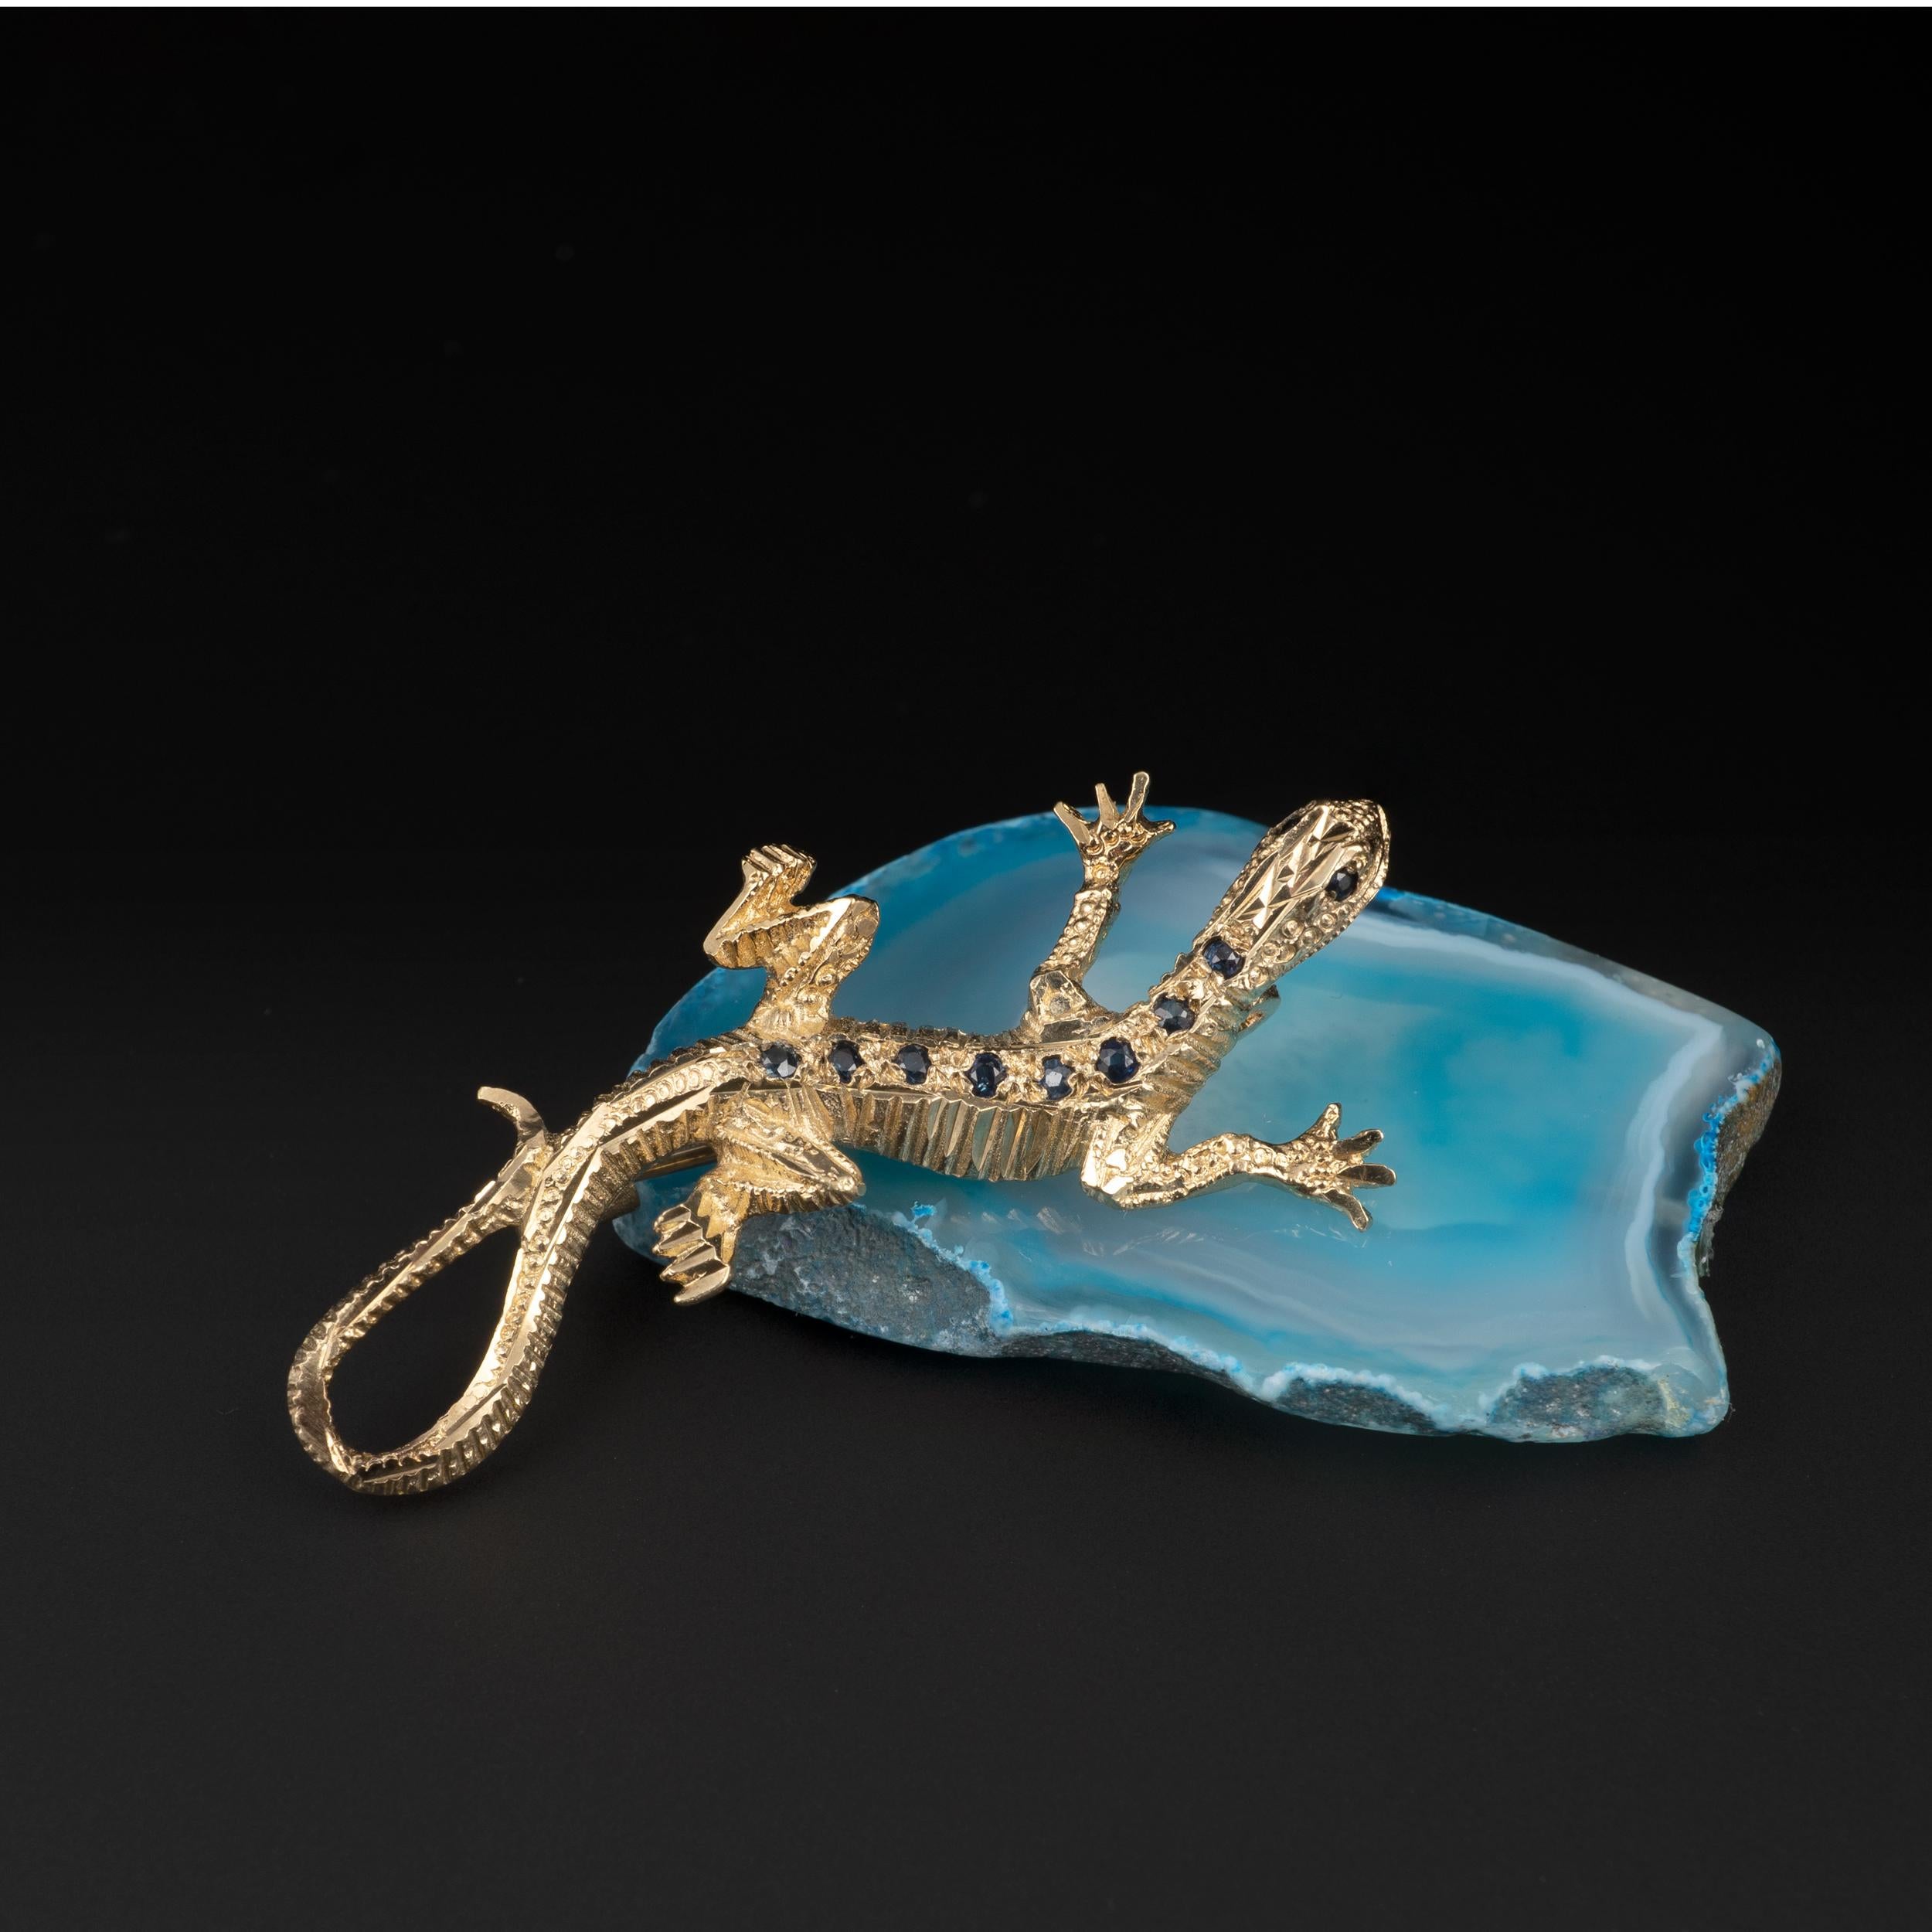 A superb Vintage gold Gecko lizard reptile brooch pin assay hallmarked Birmingham 1977

The piece is expertly modeled with superb stylized hammered texture to its back. A total of 10 round cut sapphires totaling approx 0.20 carats are set on its